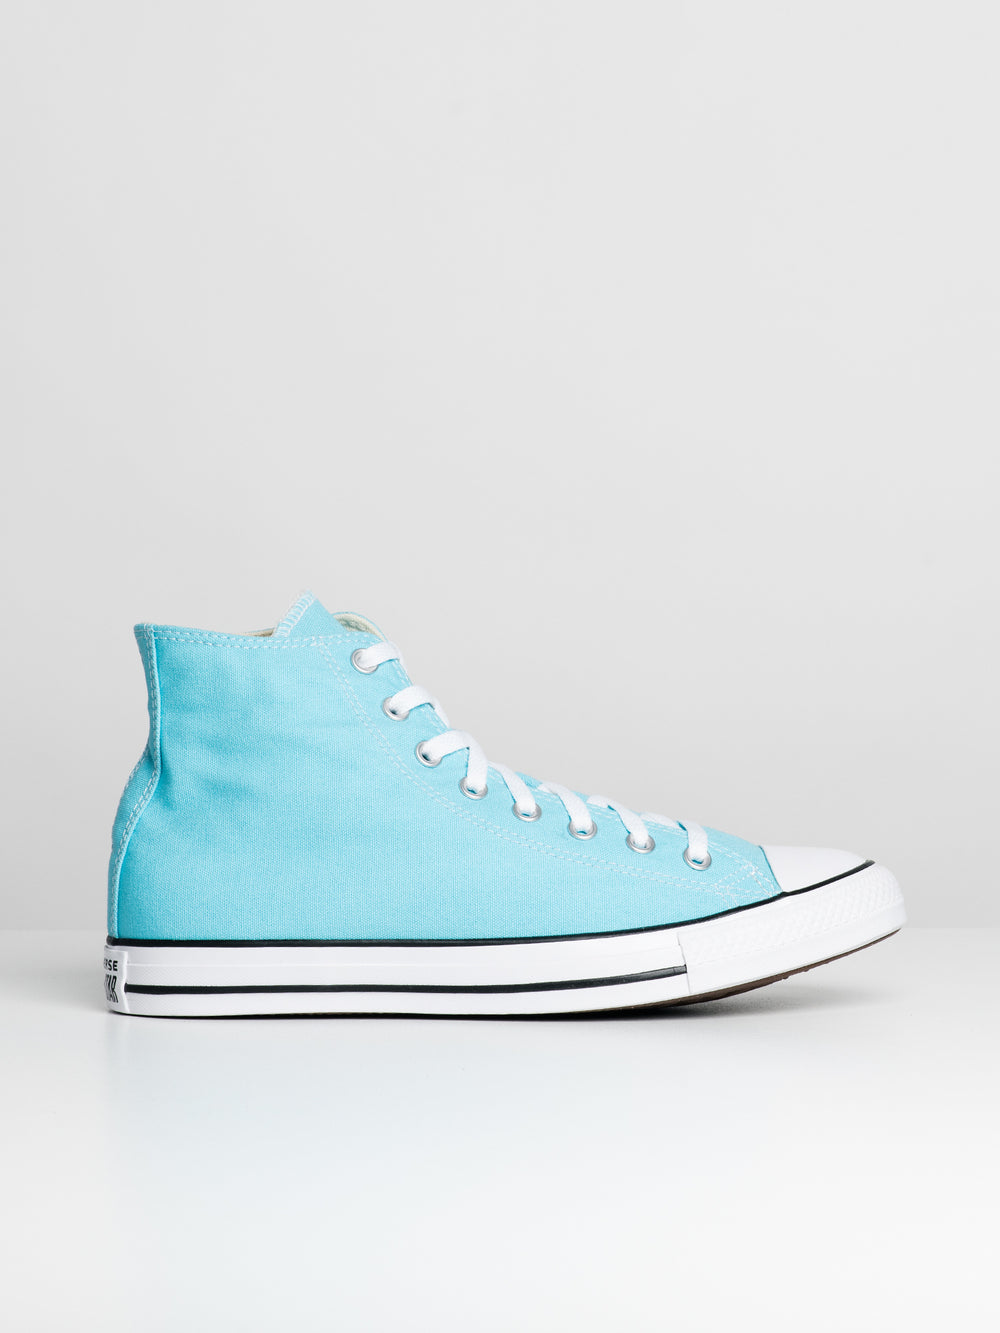 CONVERSE CHUCK TAYLOR ALL STAR HIGH TOP POUR HOMME - DÉSTOCKAGE